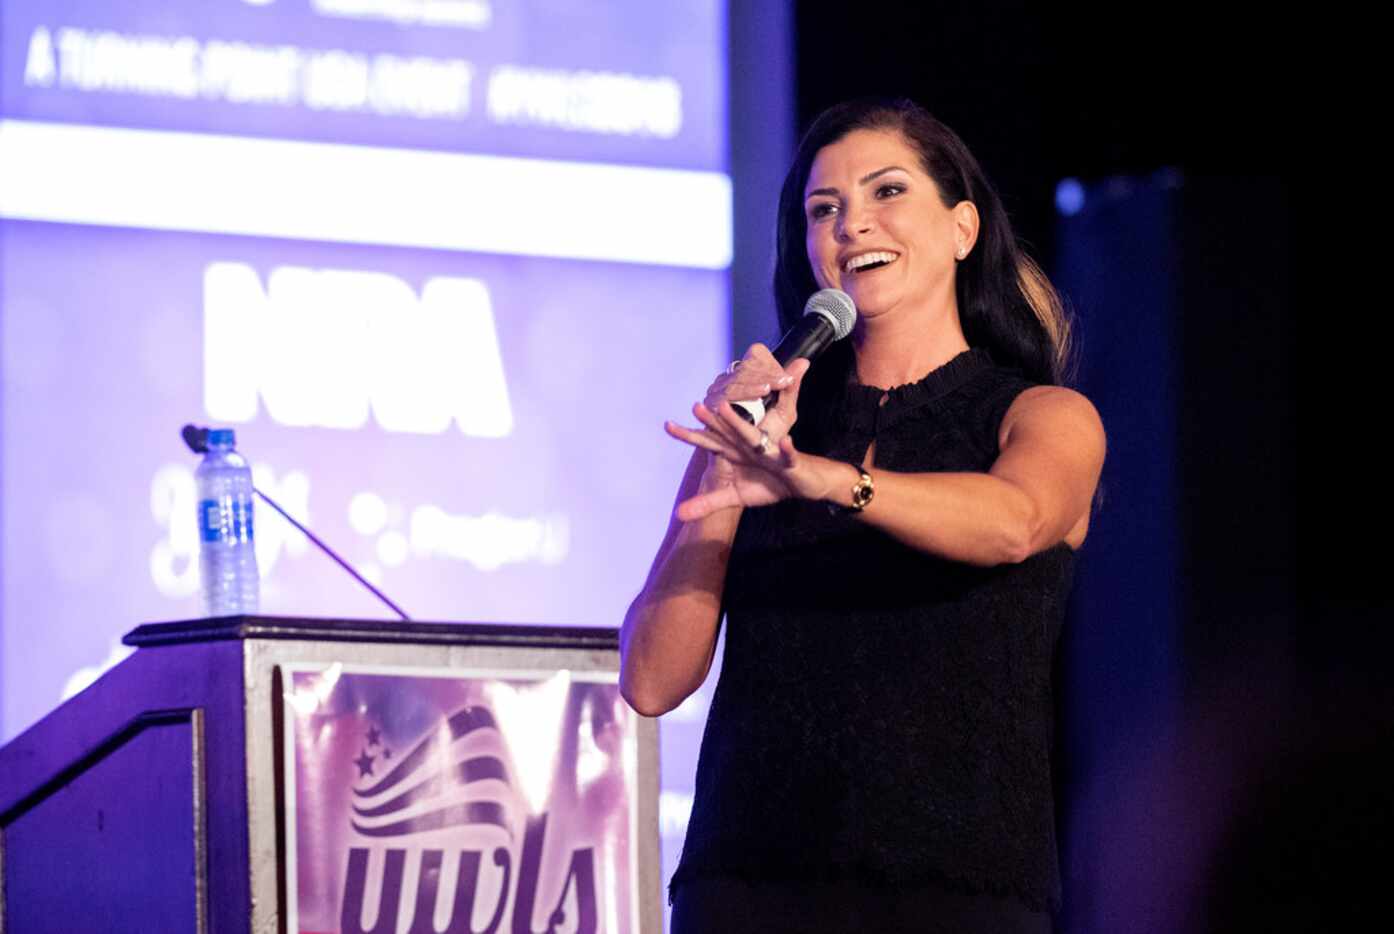 Conservative political commentator Dana Loesch speaks at the Turning Point USA Young Women's...